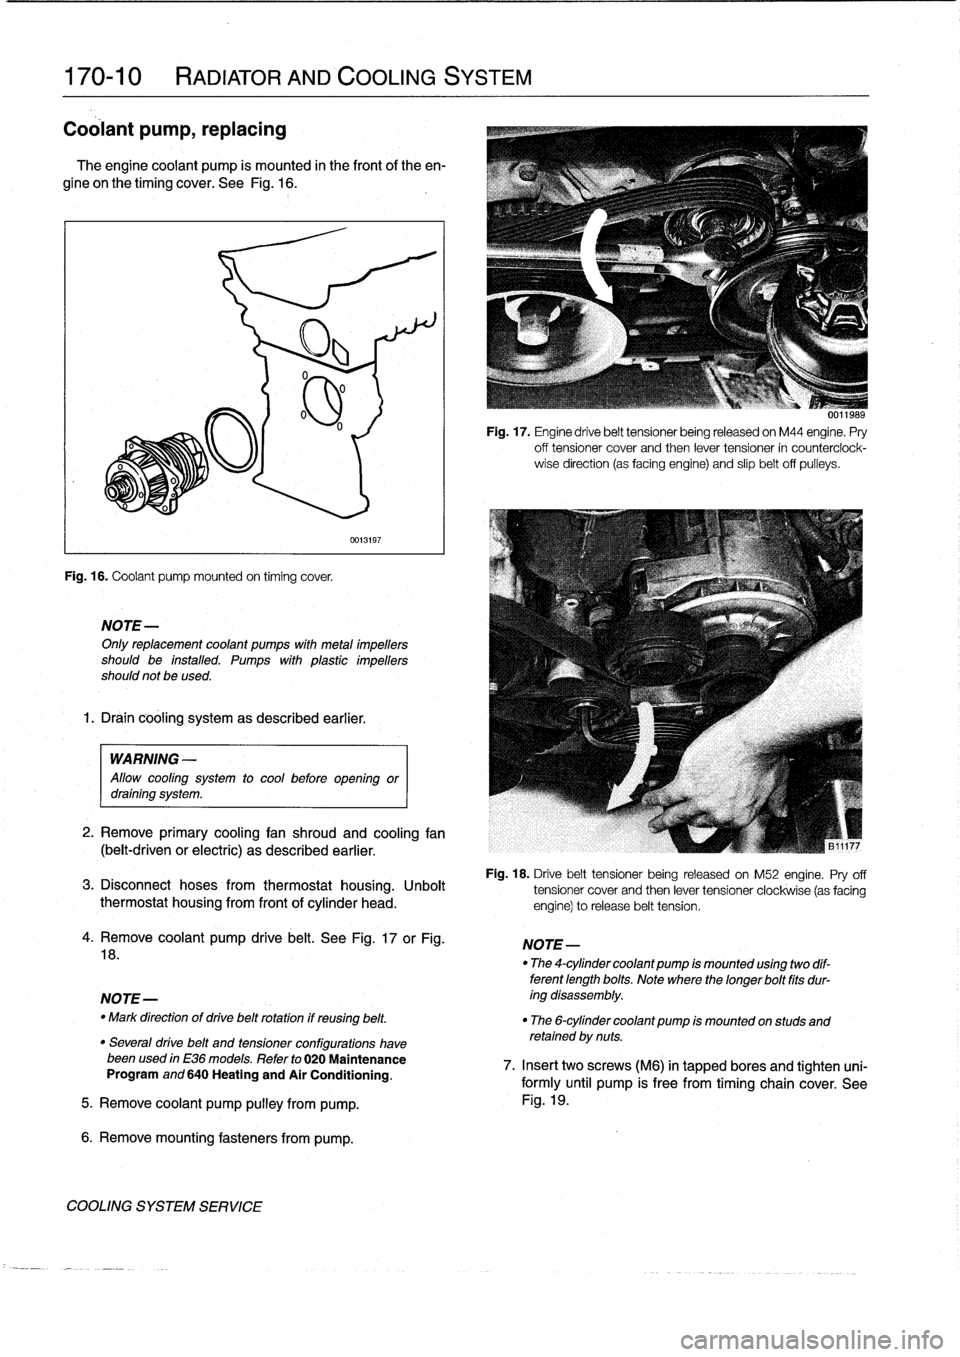 BMW 318i 1997 E36 Workshop Manual 
170-10

	

RADIATOR
AND
COOLING
SYSTEM

Coolant
pump,
replacing

The
engine
coolant
pump
is
mounted
in
the
frontof
the
en-

gine
on
the
timing
cover
.
See
Fig
.
16
.

Fig
.
16
.
Coolant
pump
mounted
